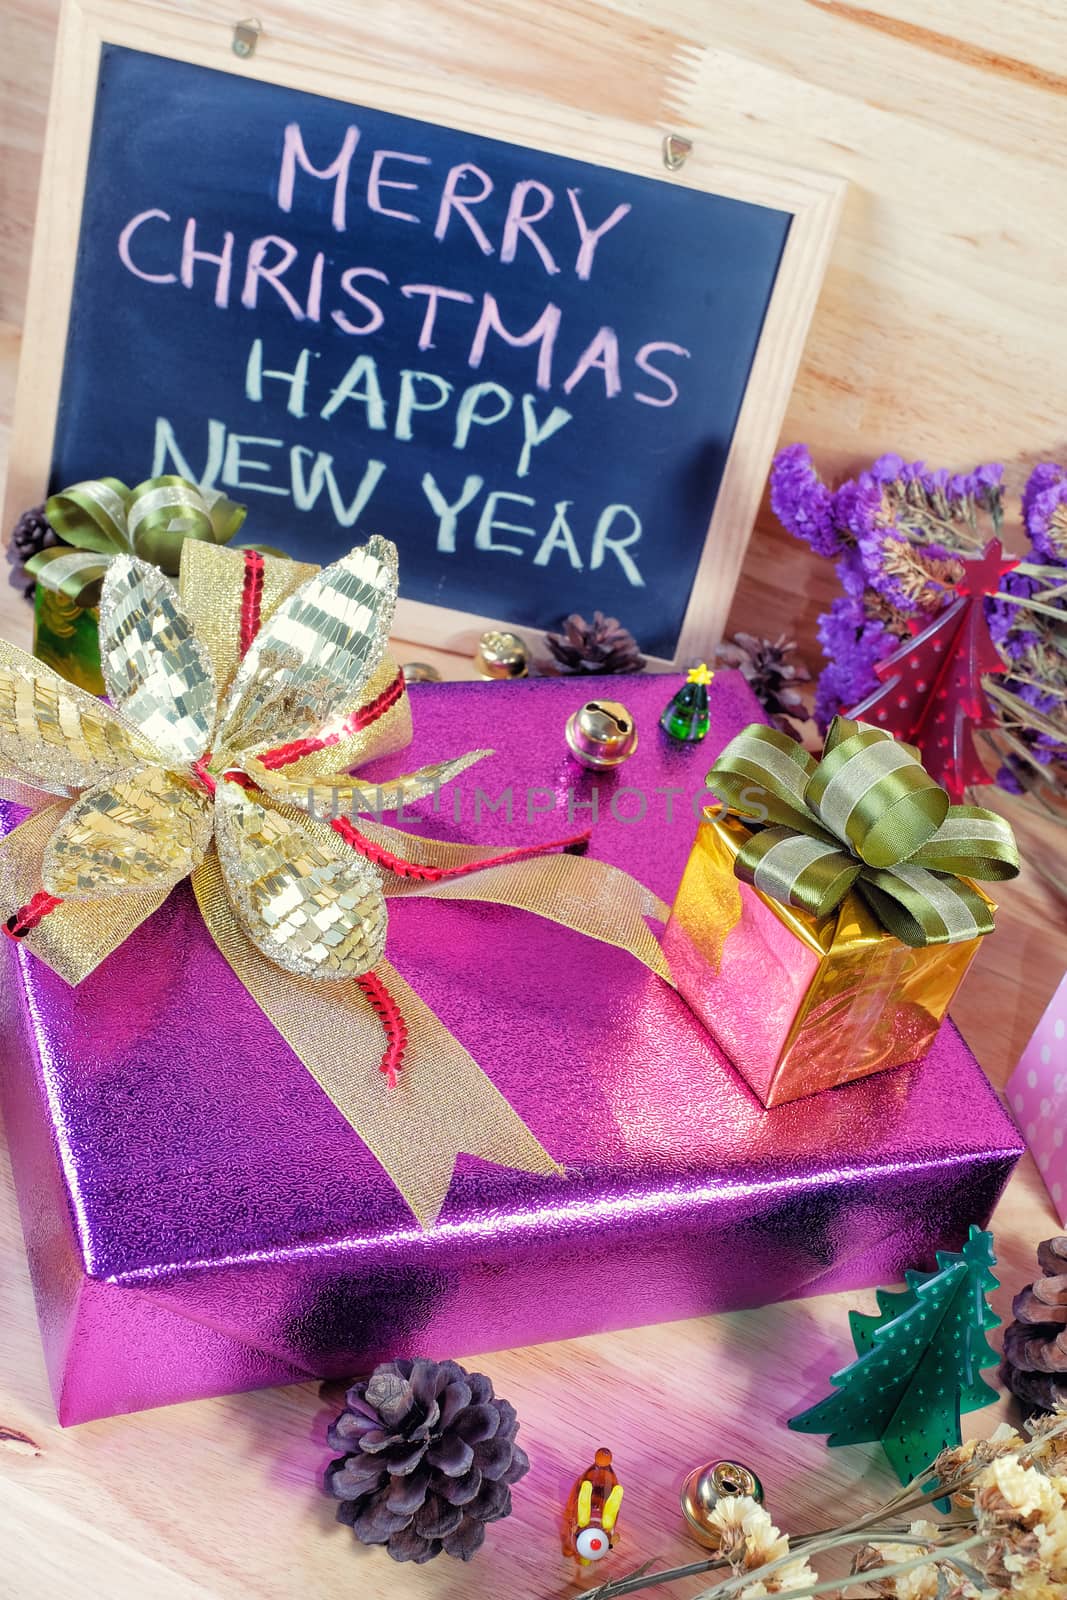 Merry Christmas and Happy New Year - present boxes with Xmas decorations